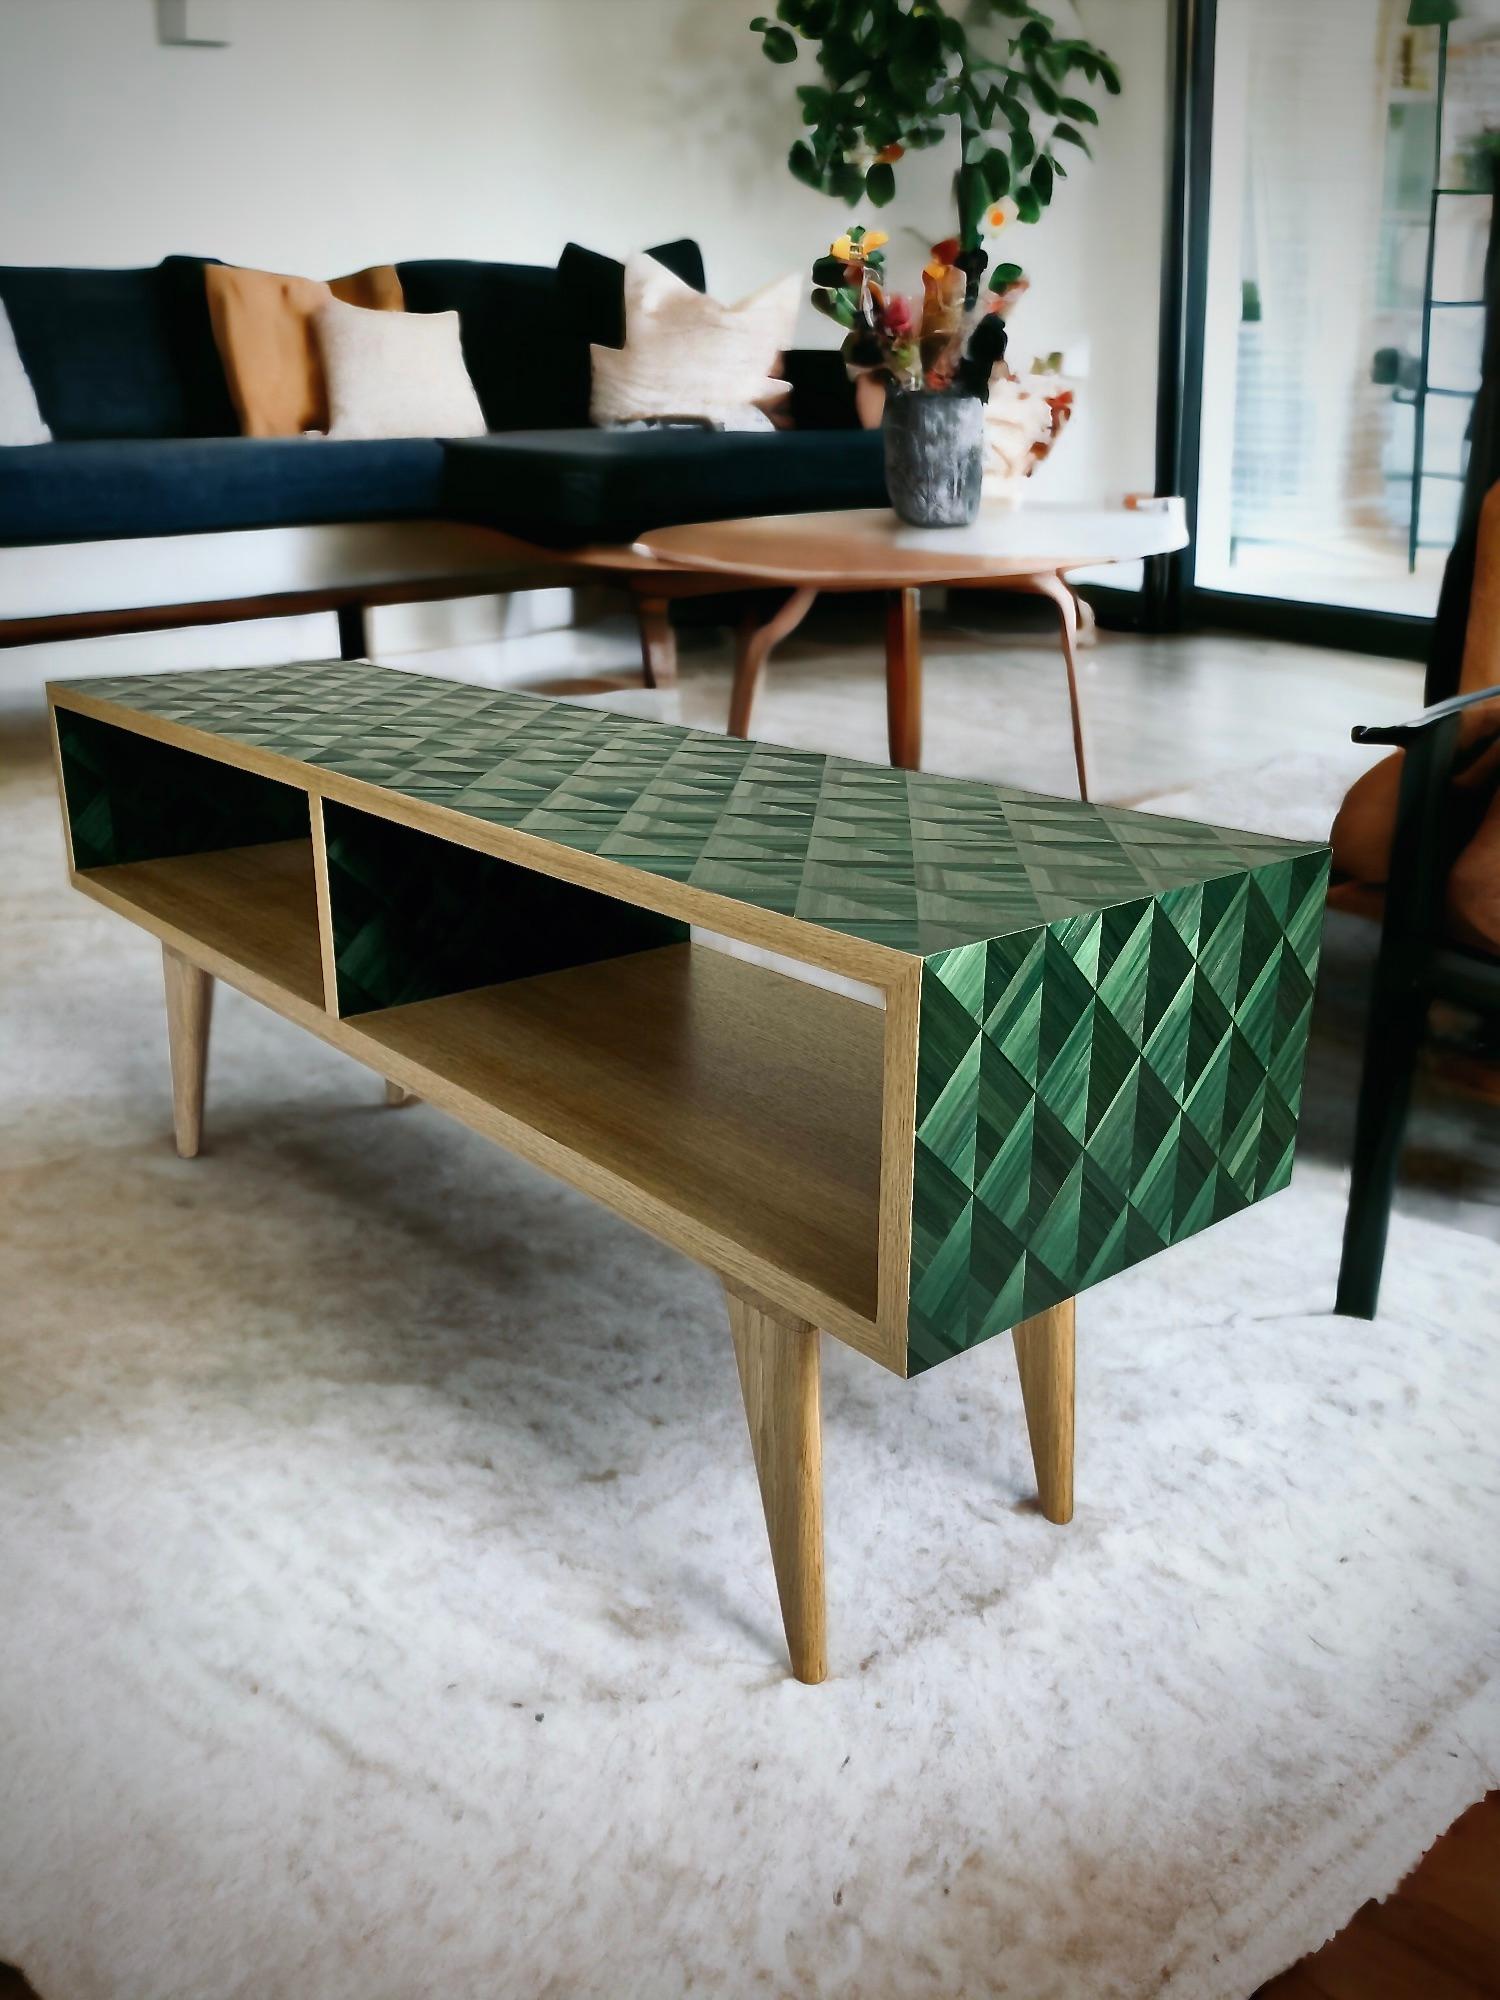 This coffee table was designed by its designer to play as much as possible with the light effects of rye straw.
The top is entirely inlaid with a pattern which captures the light enormously and gives unique effects of relief and depth.
The pattern